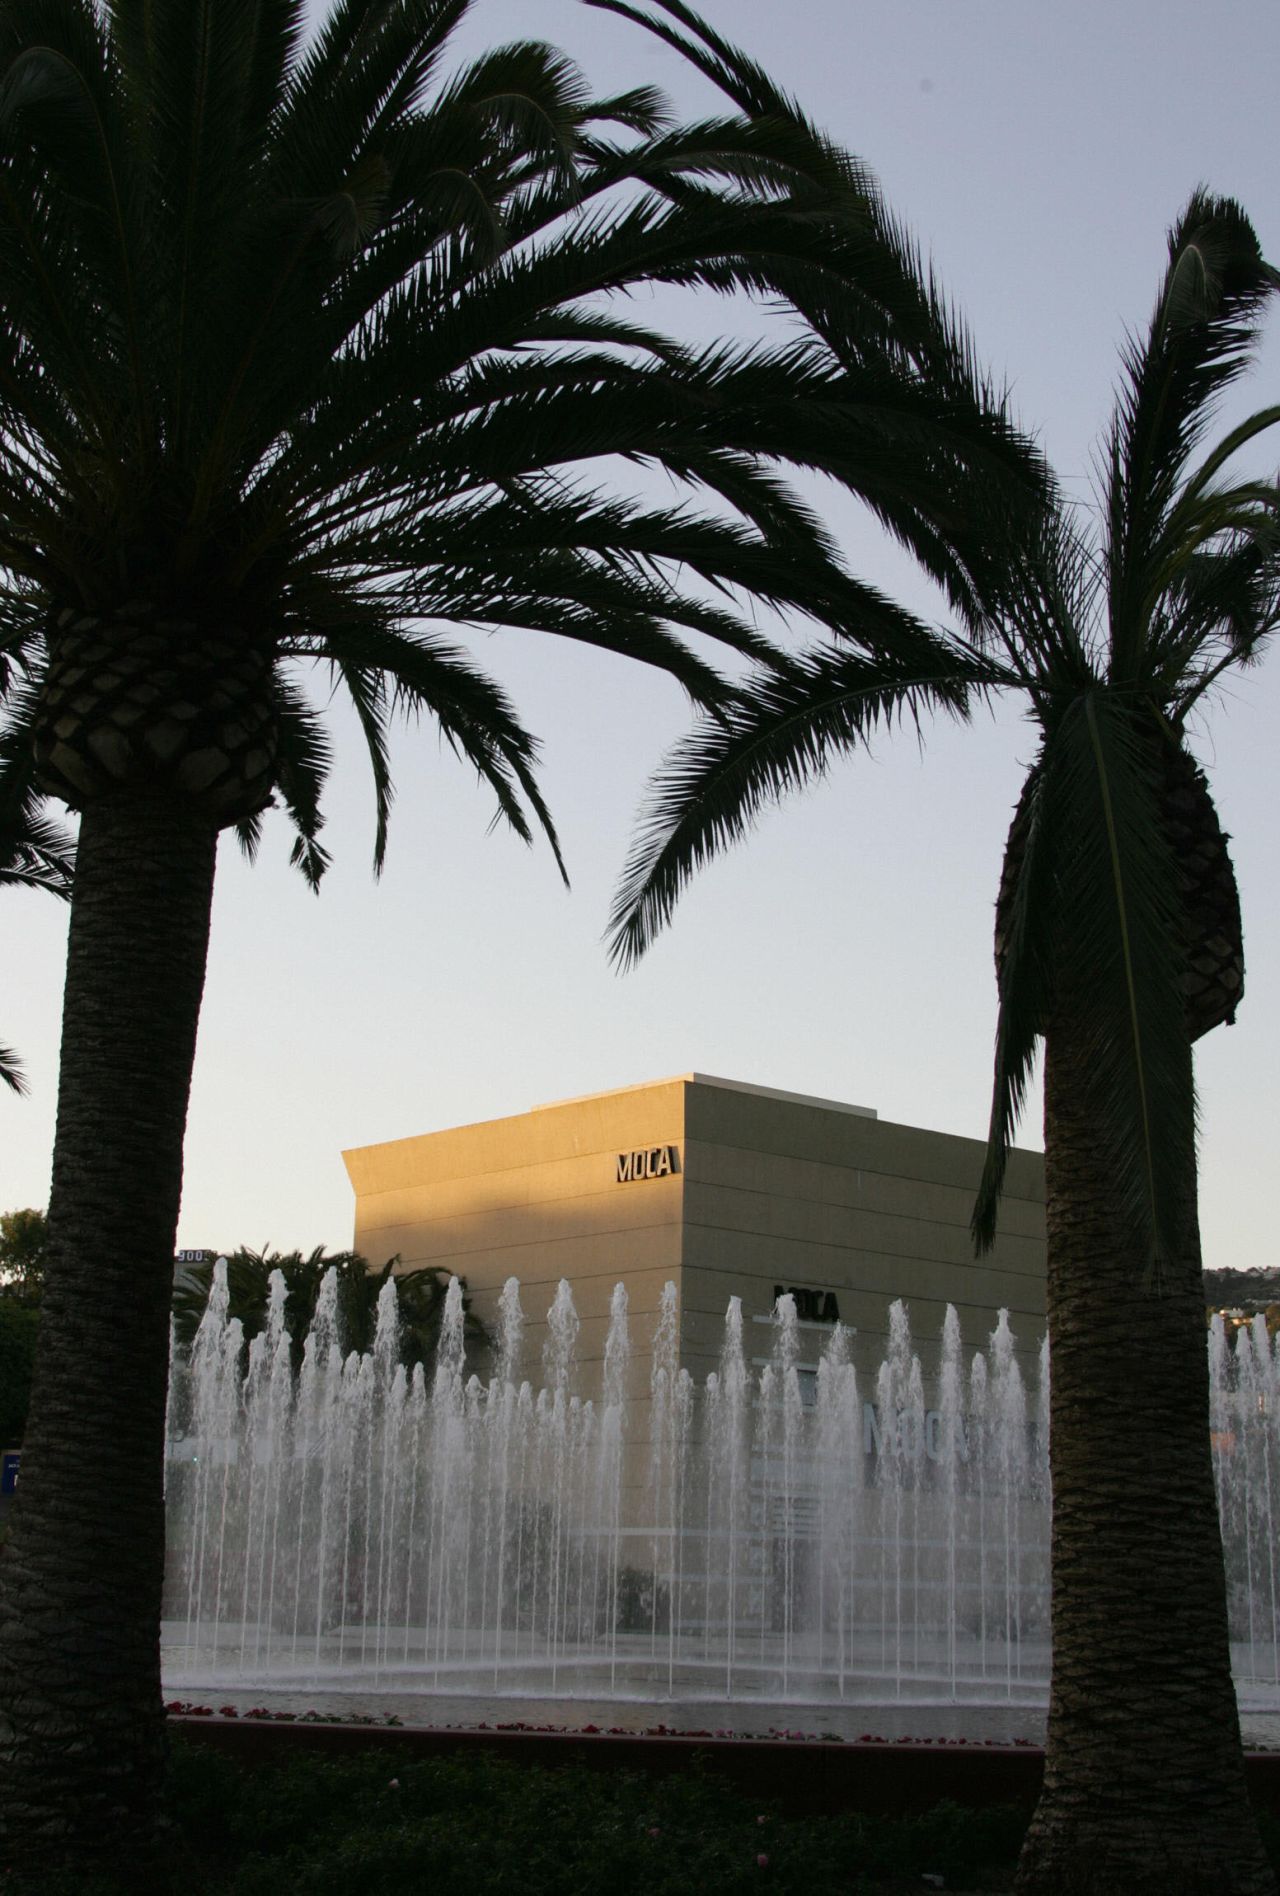 The city is home to several world-class museums, including The Museum of Contemporary Art, pictured. 